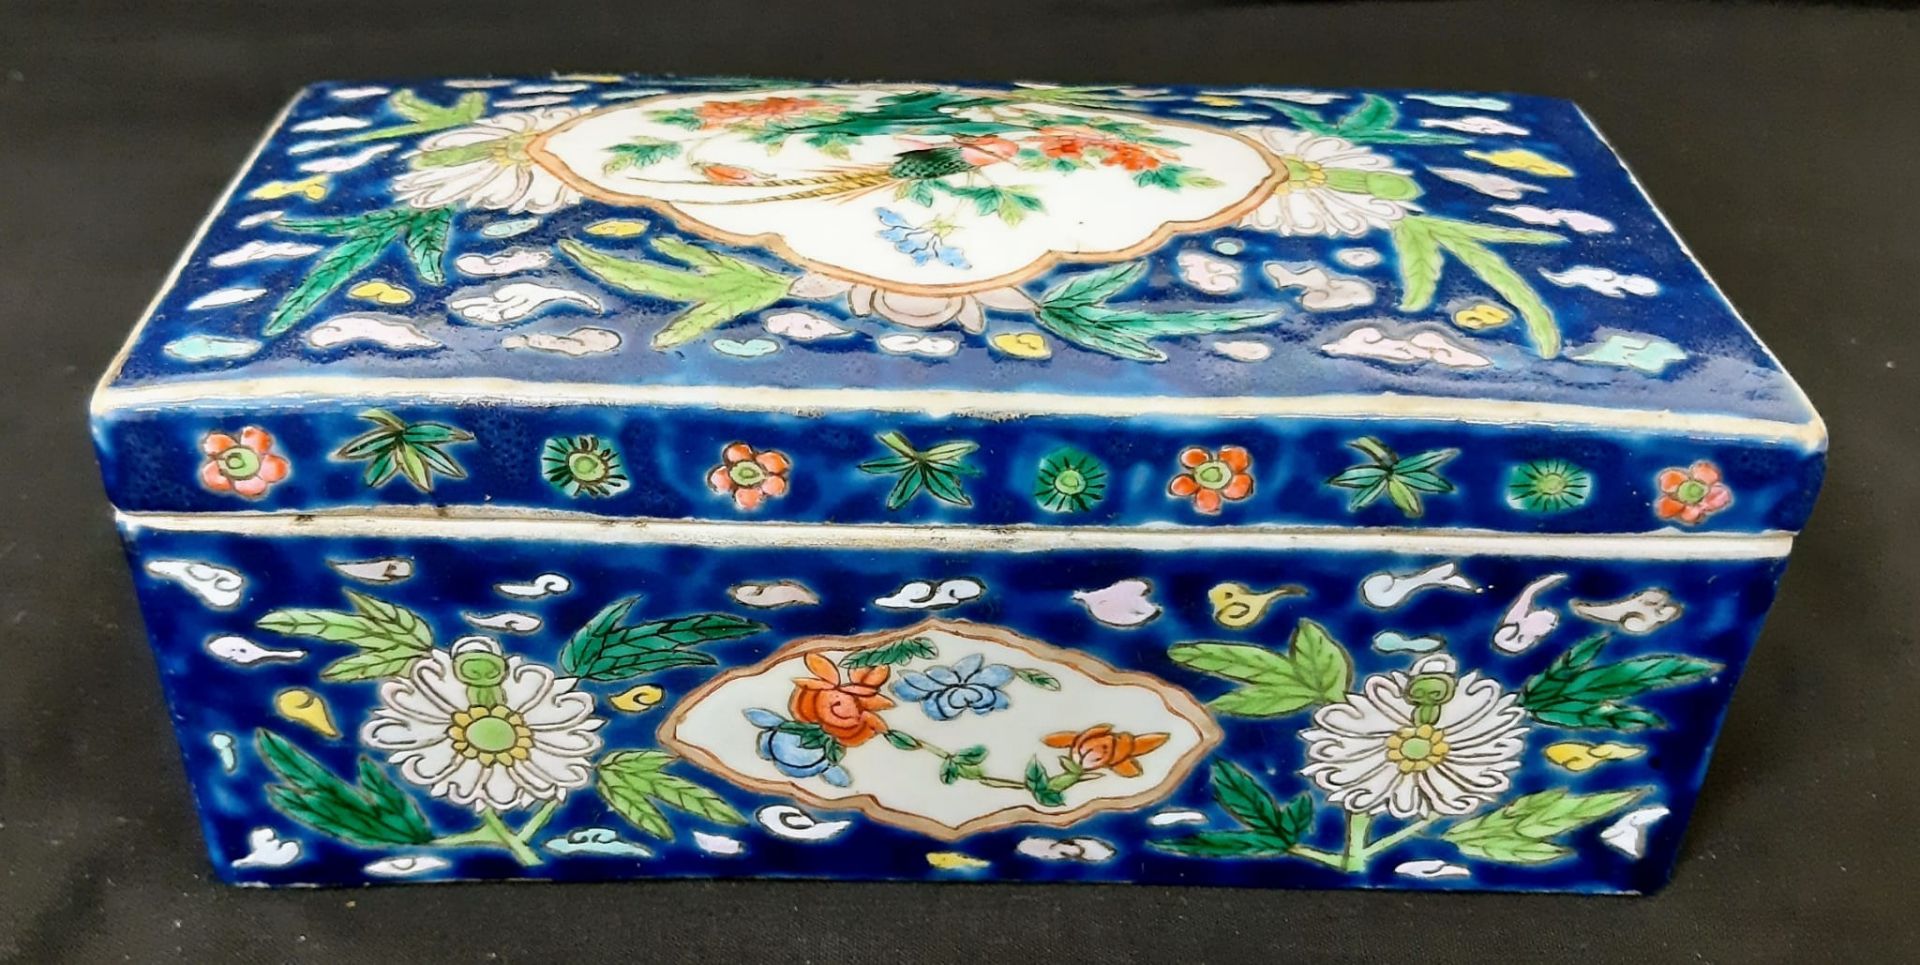 An Antique 19th Century Chinese Hand-Painted Large Jewellery/Trinket Ceramic Box. A colourful glazed - Bild 3 aus 7